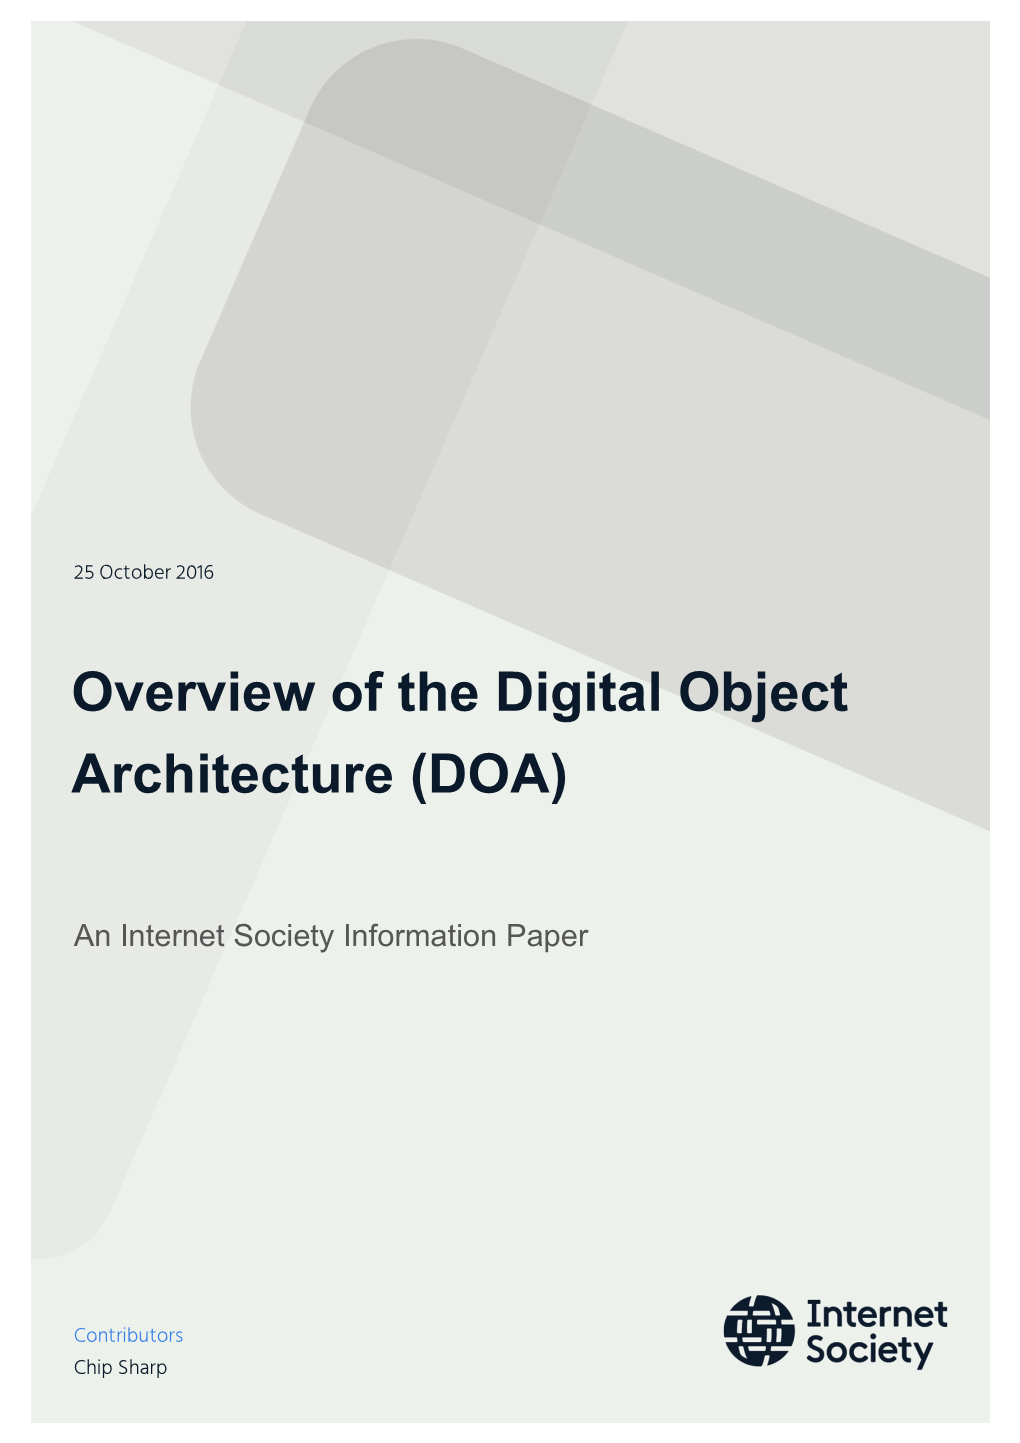 Overview of the Digital Object Architecture (DOA)